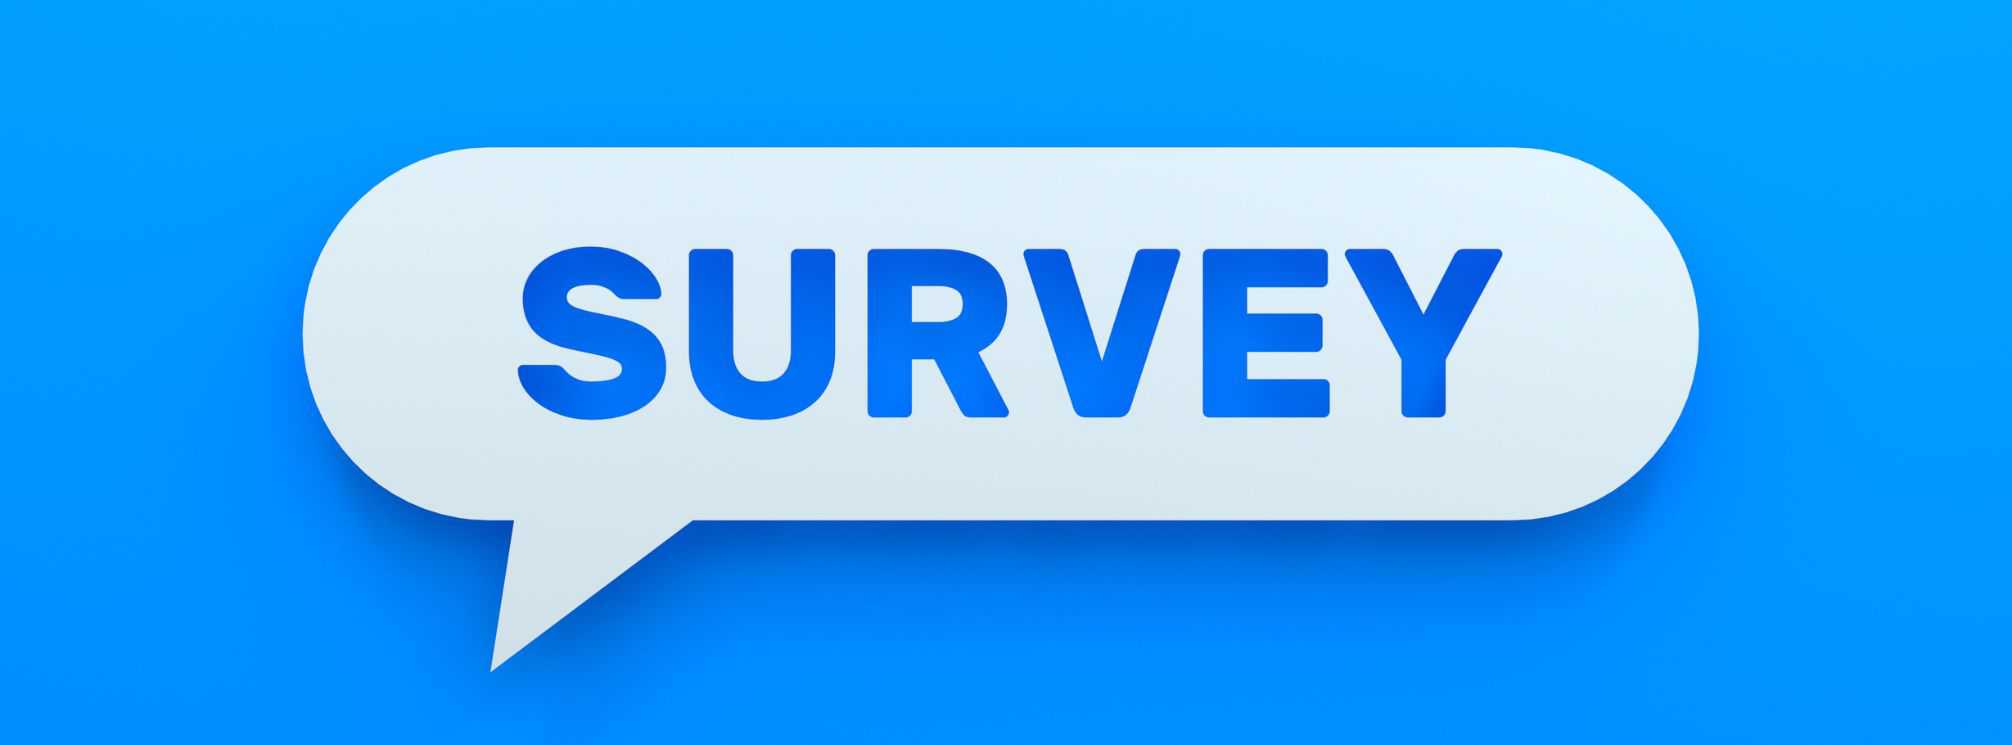 blue image with a speech bubble that says "survey" on it